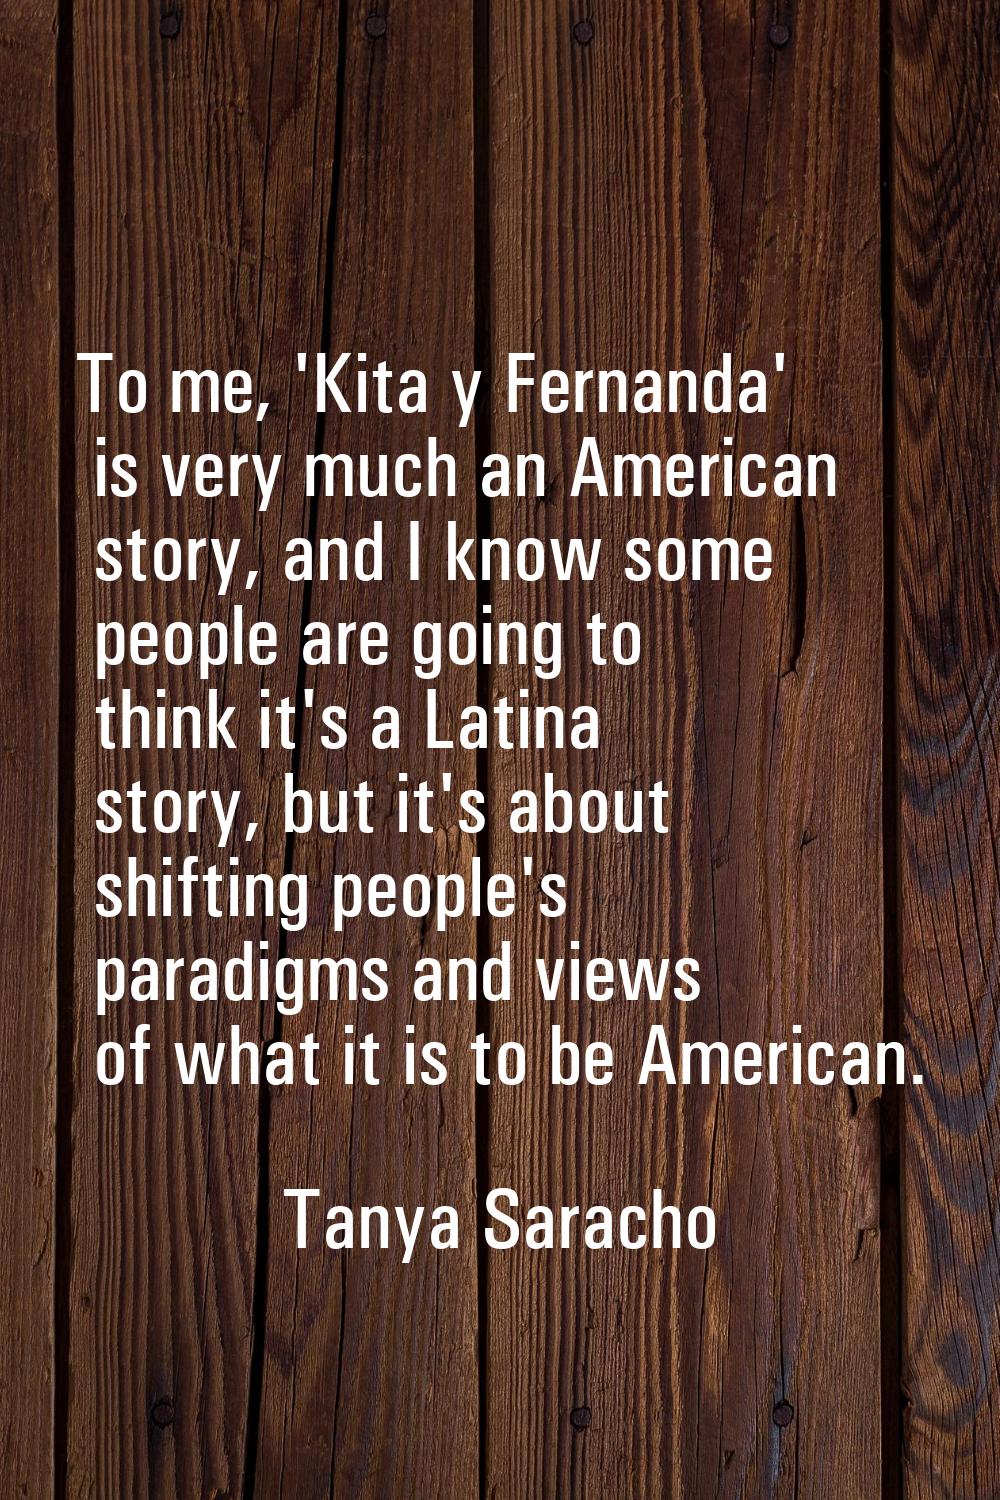 To me, 'Kita y Fernanda' is very much an American story, and I know some people are going to think 